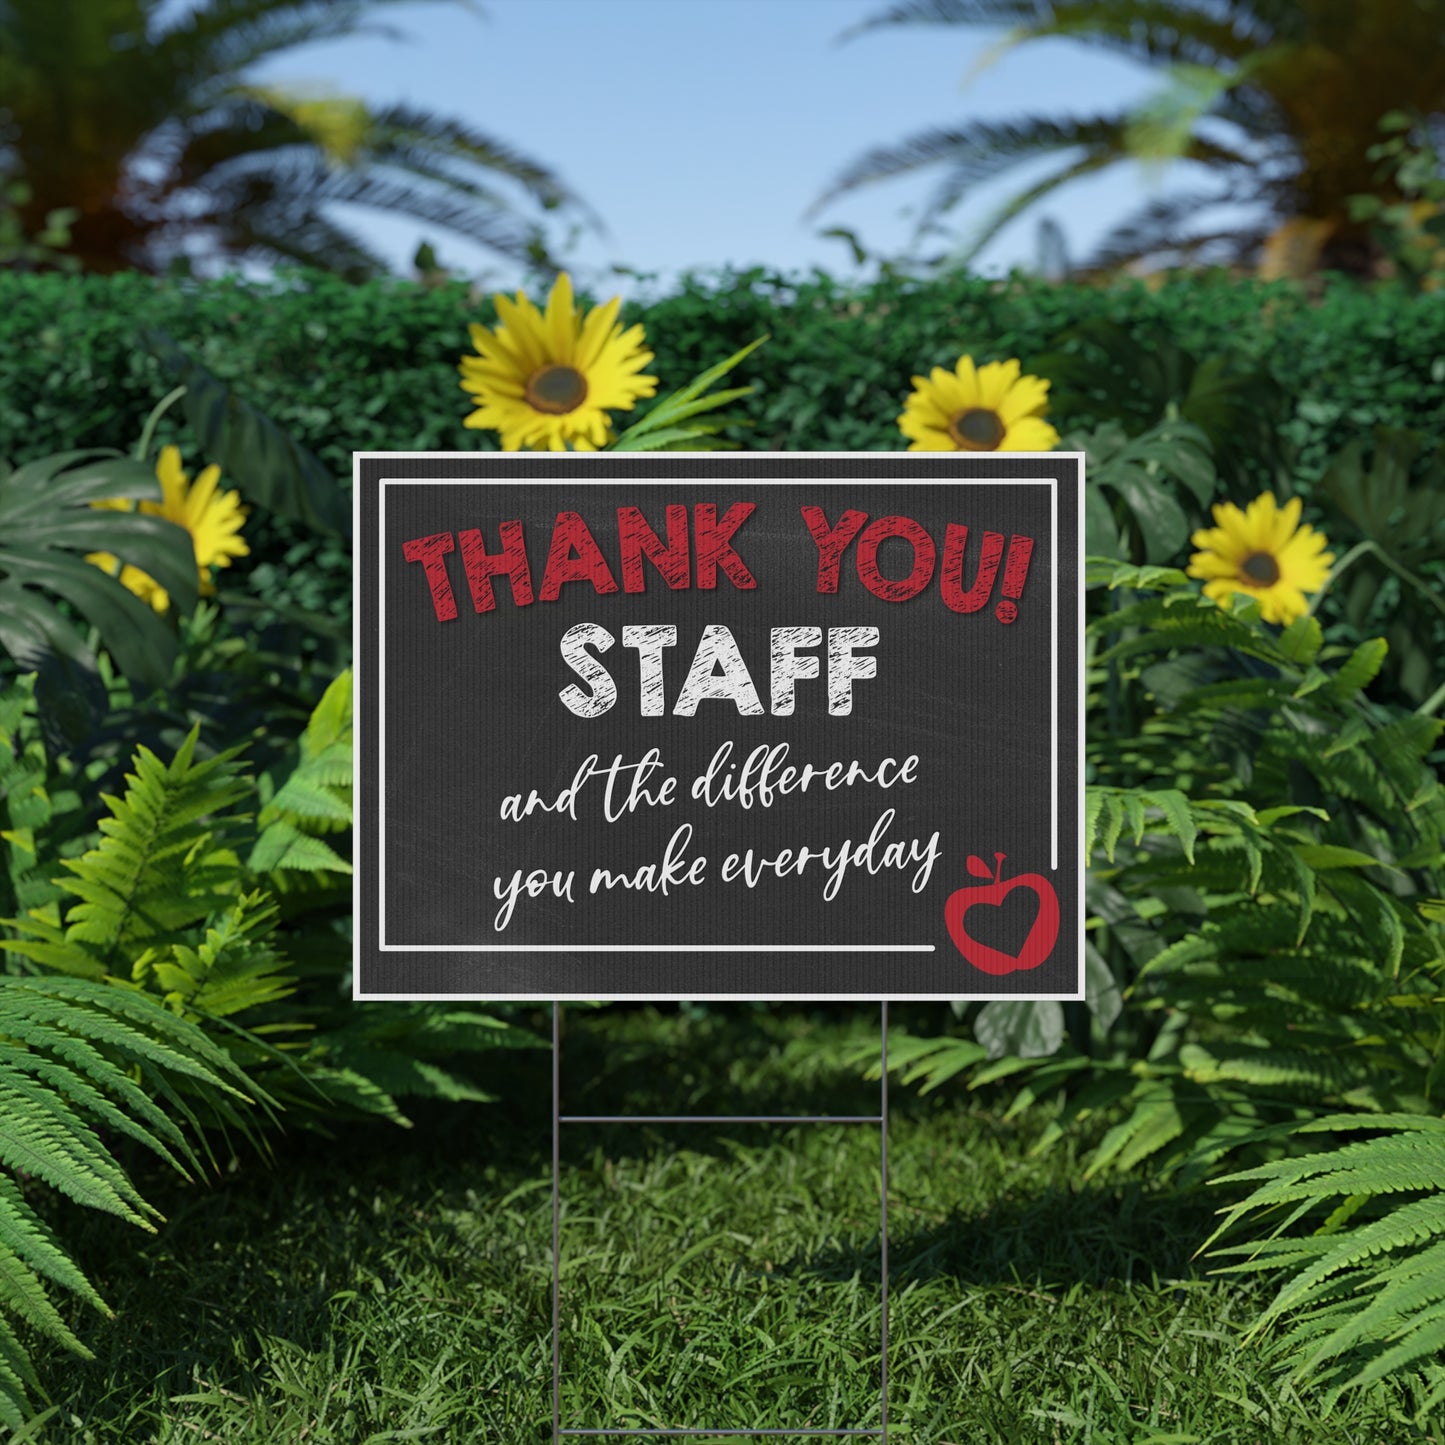 Thank You Staff, The Difference You Make Everyday, Apple, Yard Sign, Printed 2-Sided -18 x 12,24x18 or 36x24, Metal H-Stake Included, v8